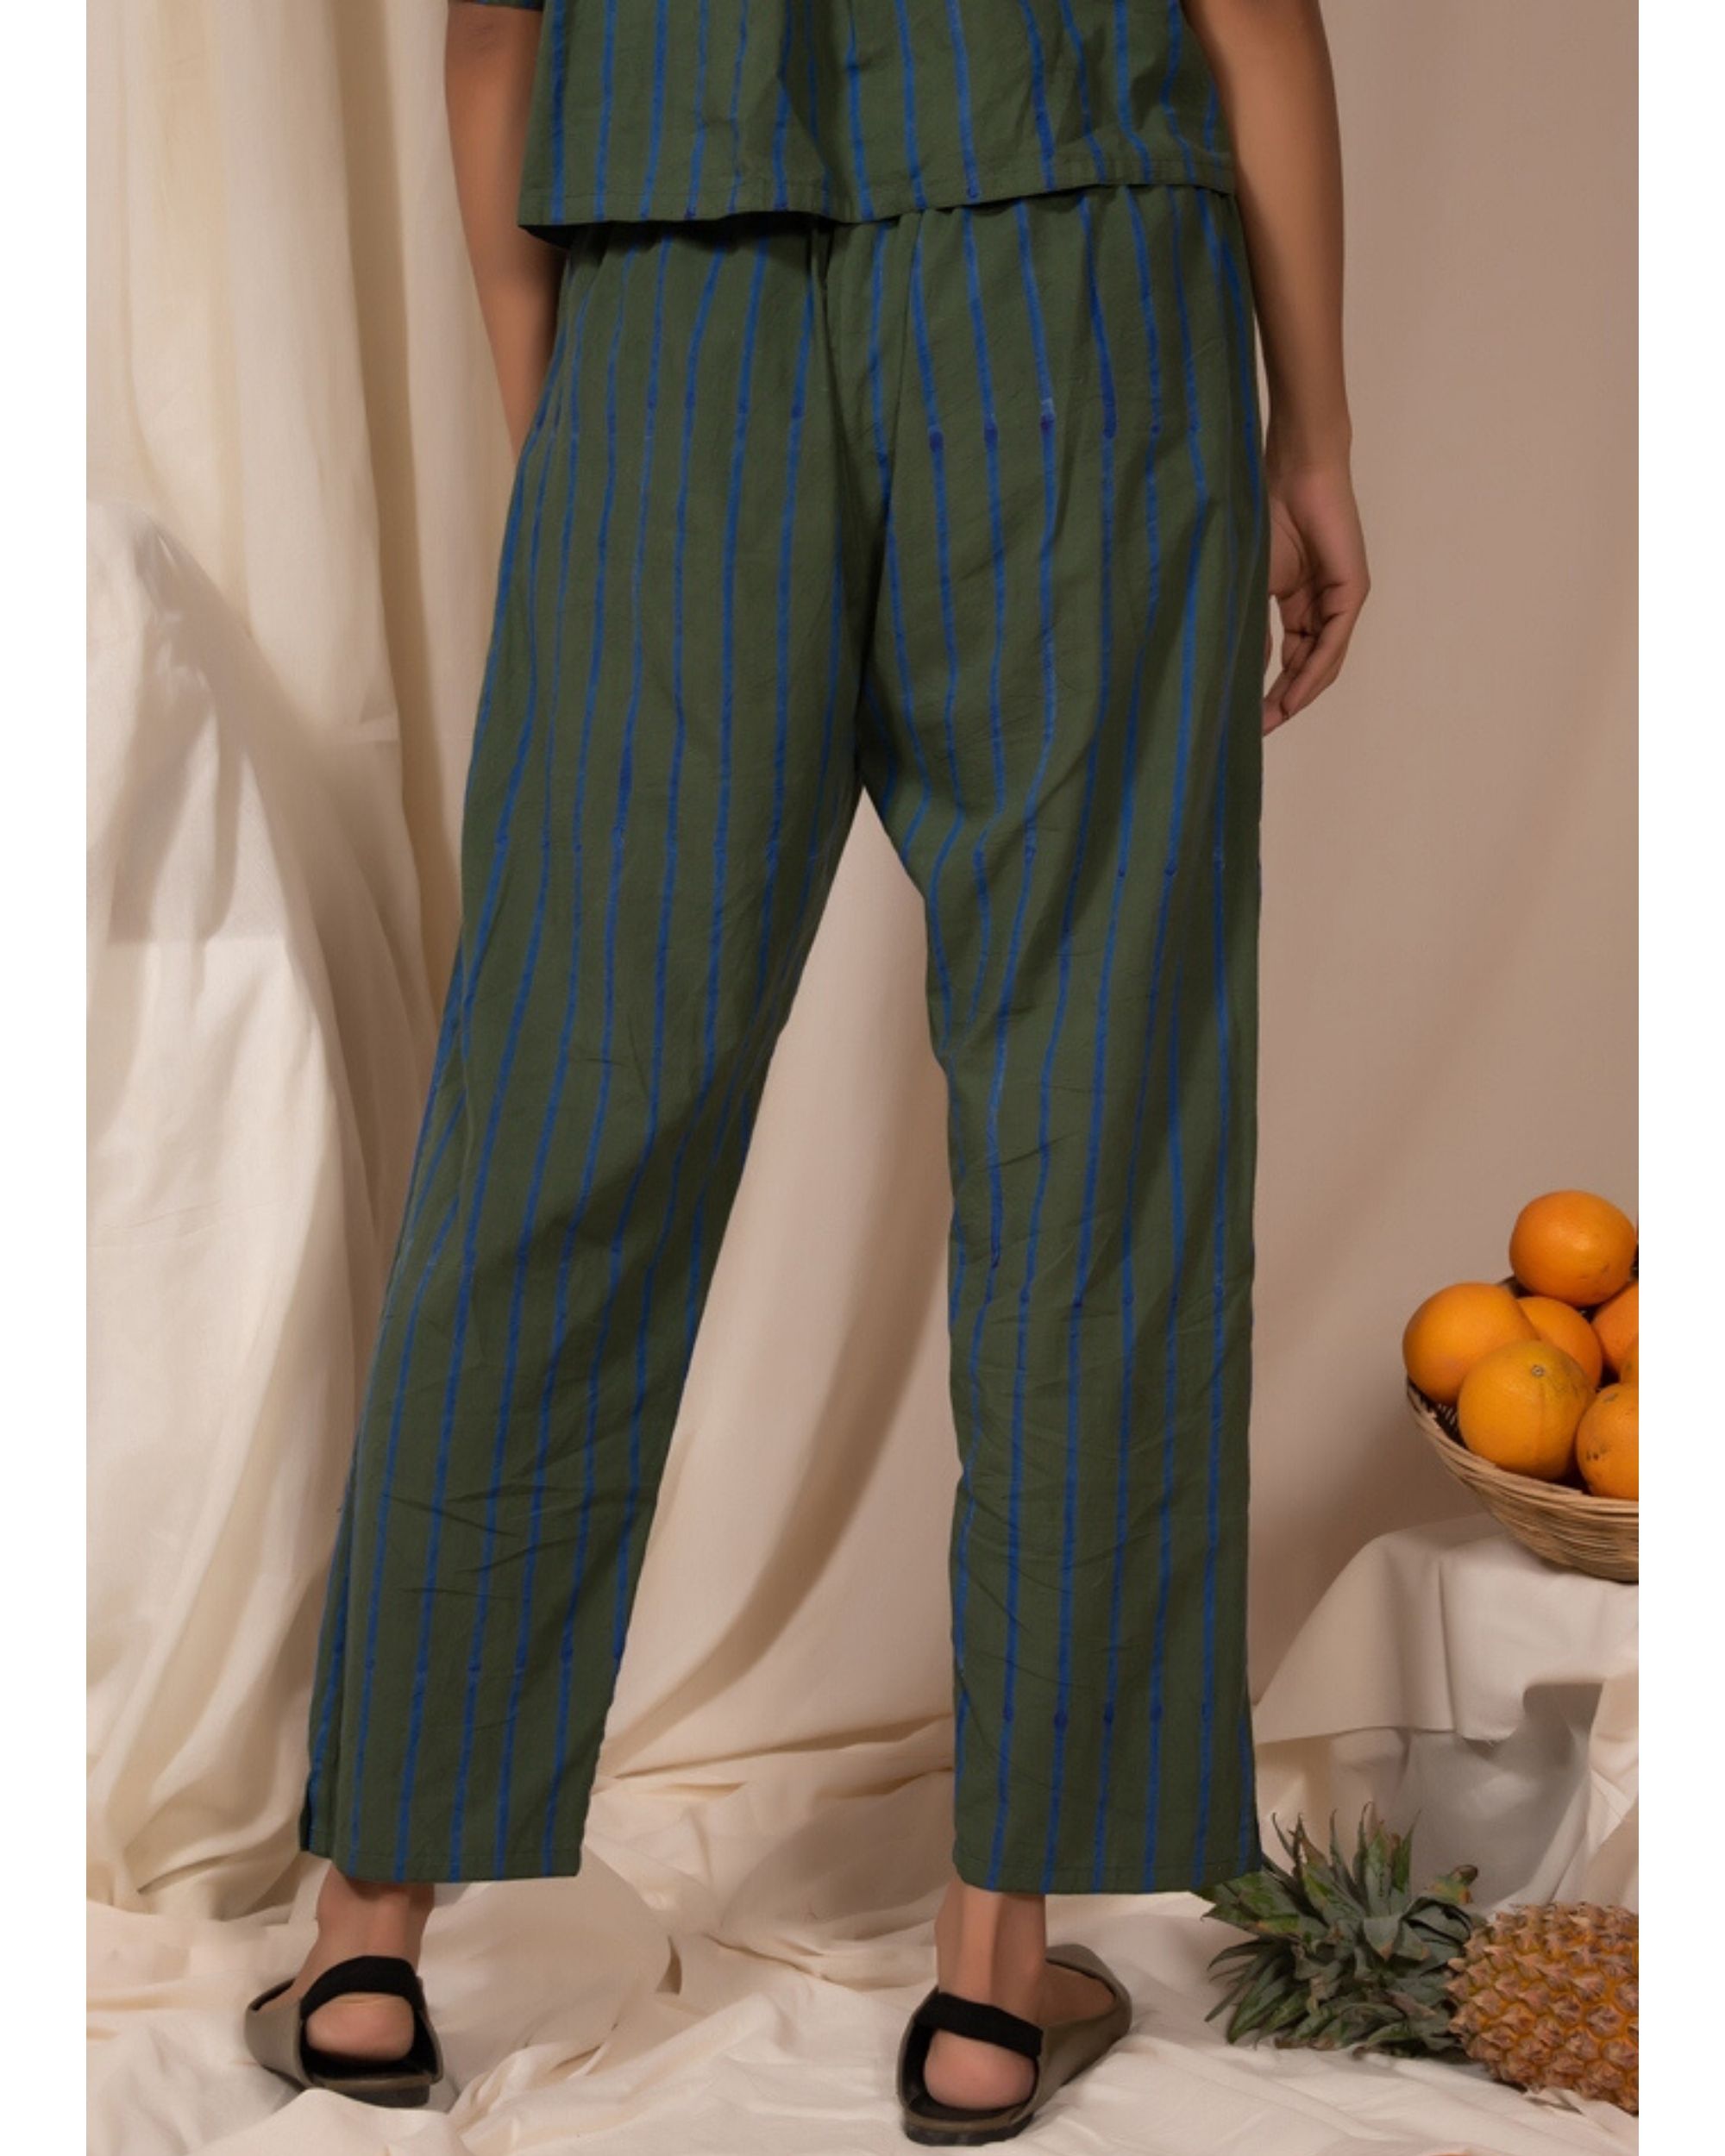 Dark green striped pants by Silai | The Secret Label